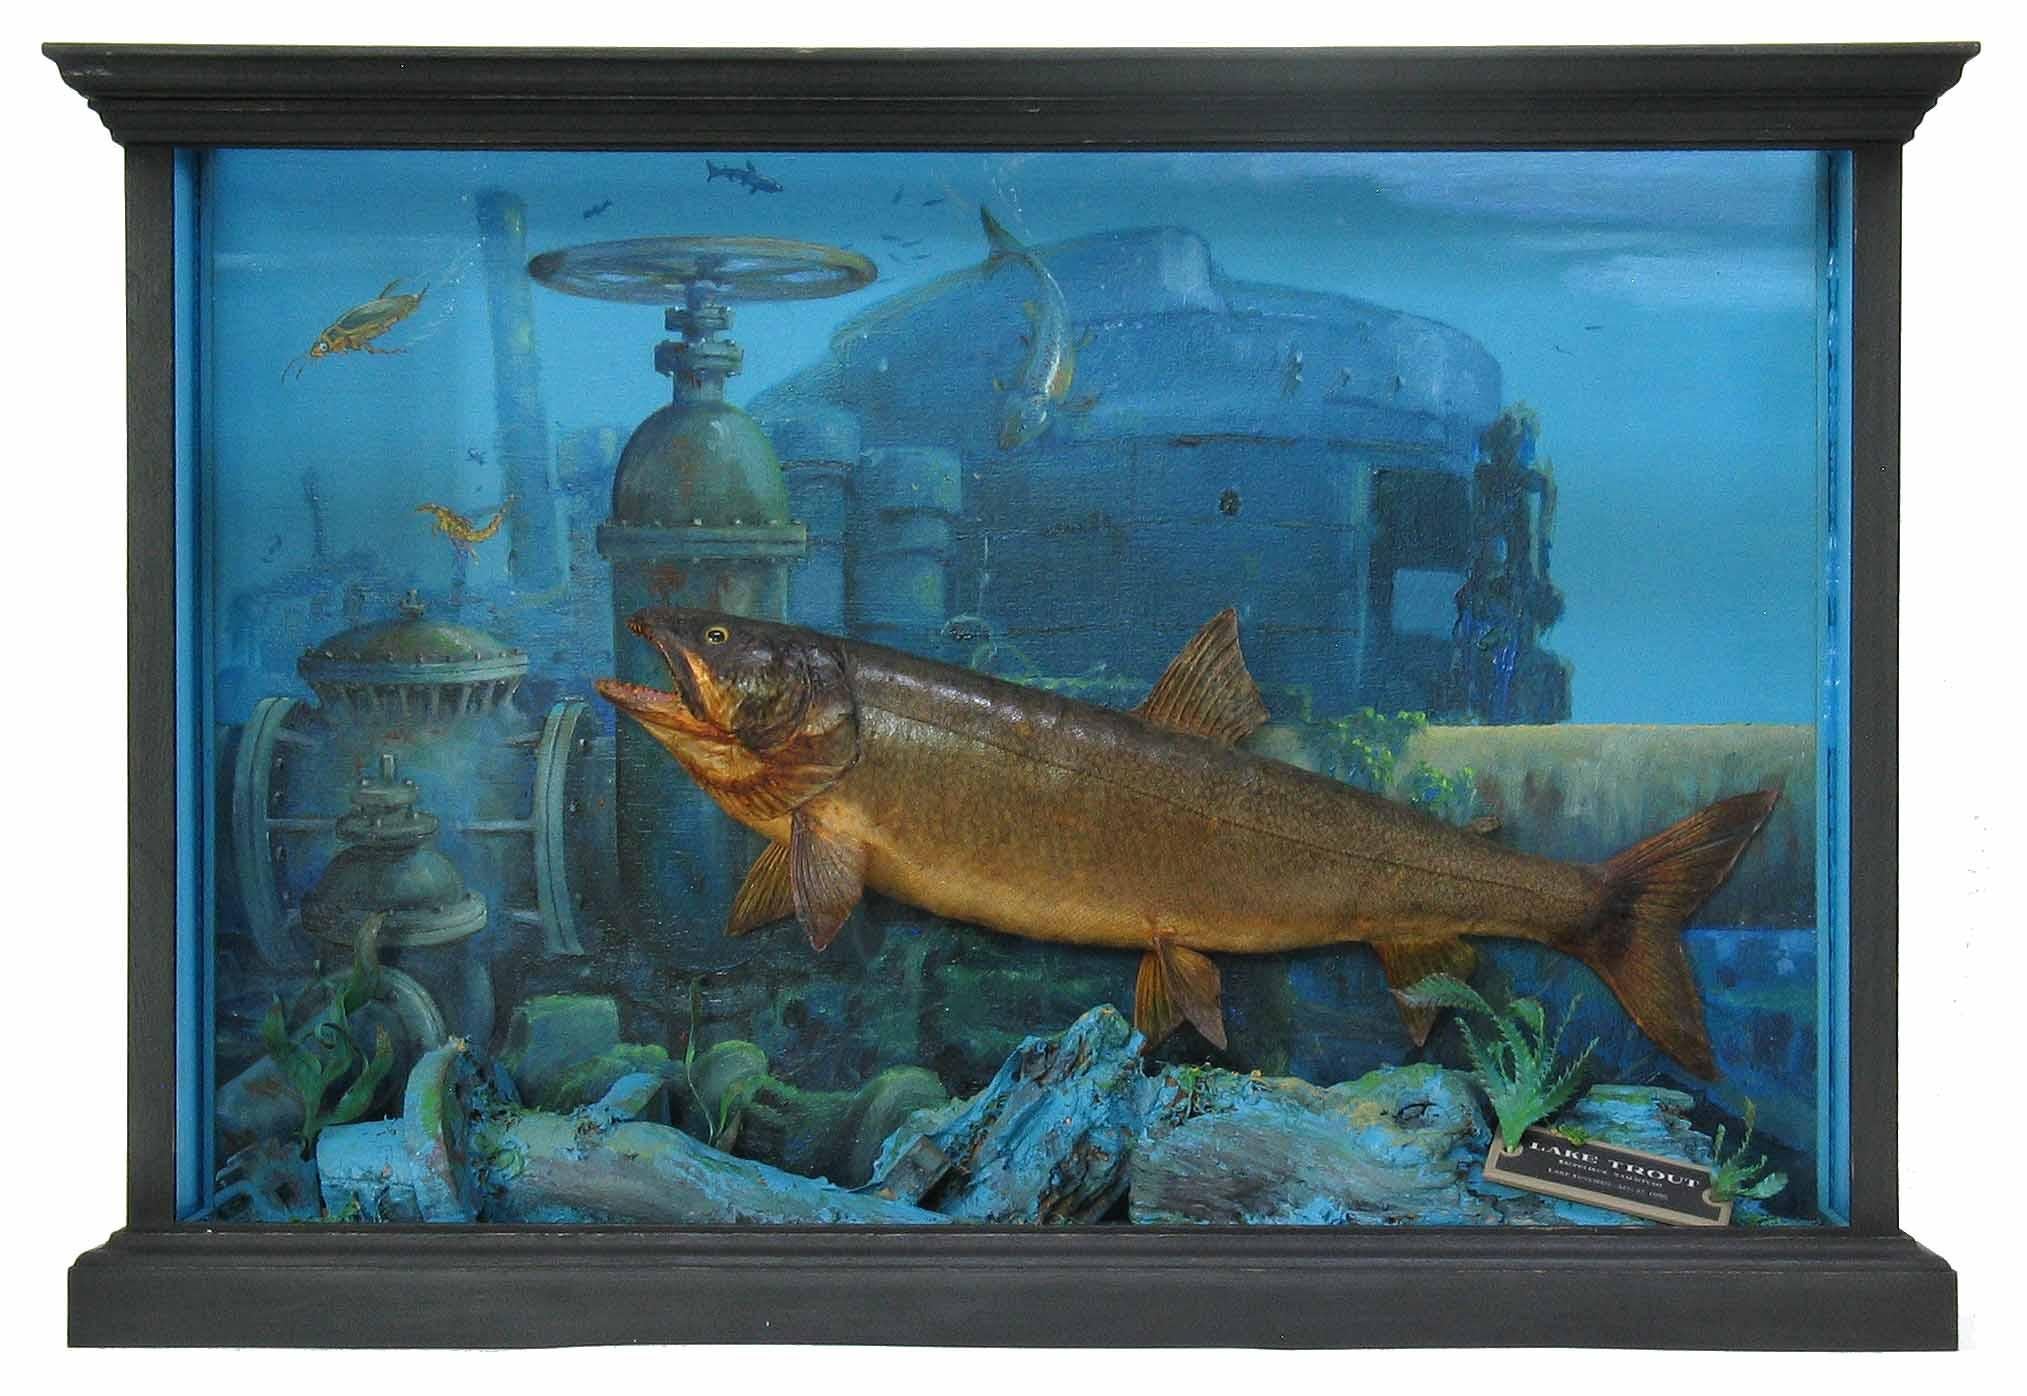 Wood Unusual Fish Taxidermy Diorama Set in Decaying Underwater Industrial Environment